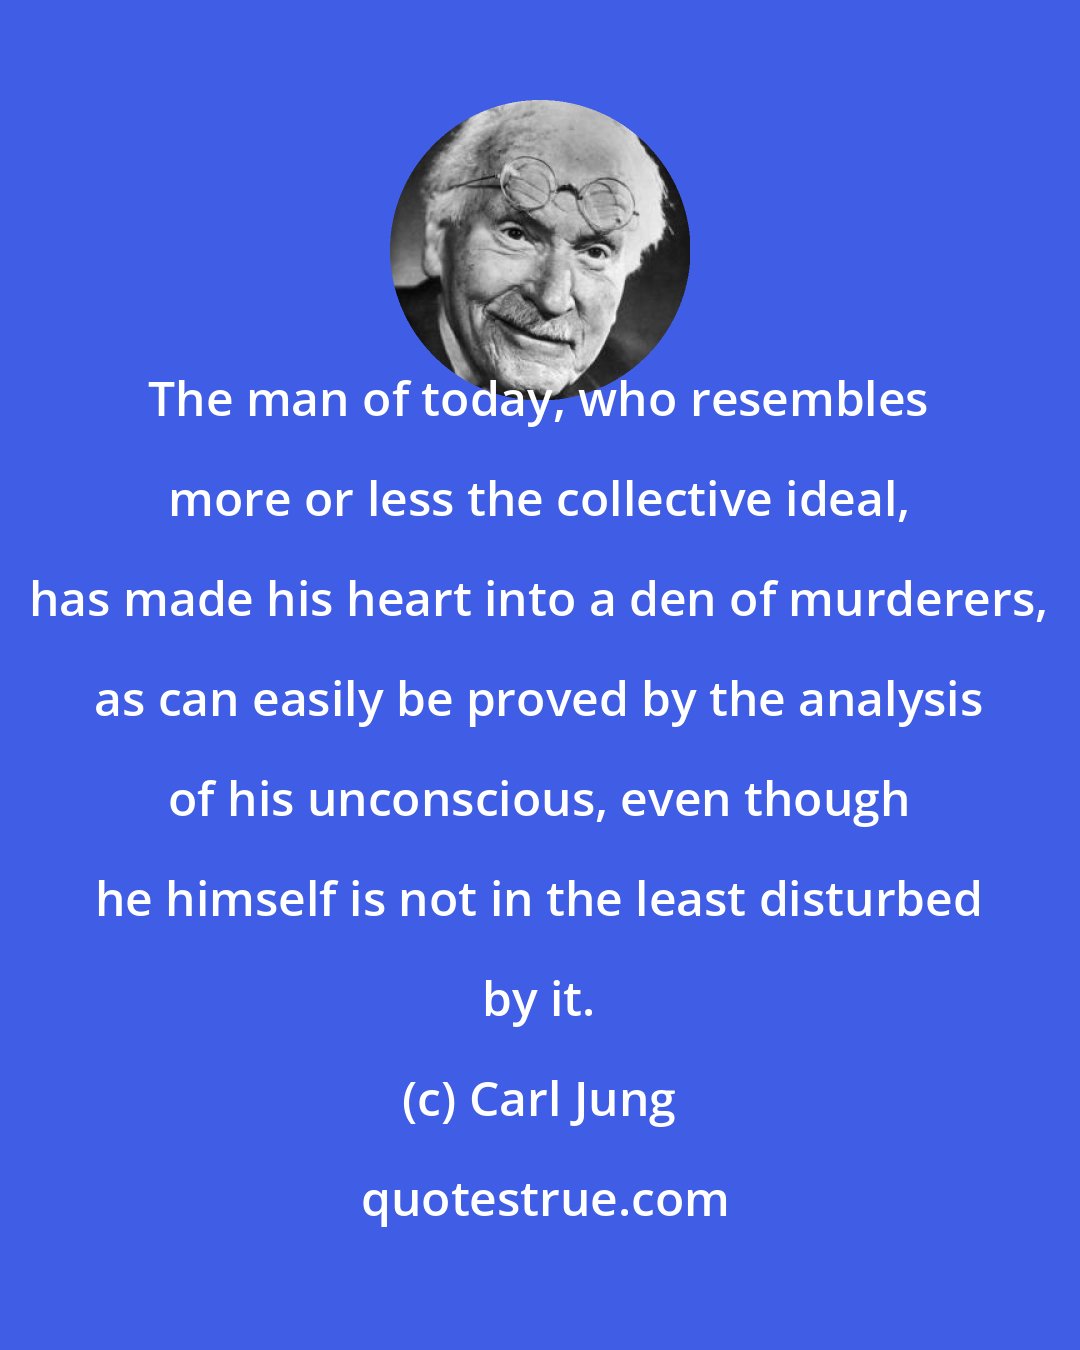 Carl Jung: The man of today, who resembles more or less the collective ideal, has made his heart into a den of murderers, as can easily be proved by the analysis of his unconscious, even though he himself is not in the least disturbed by it.